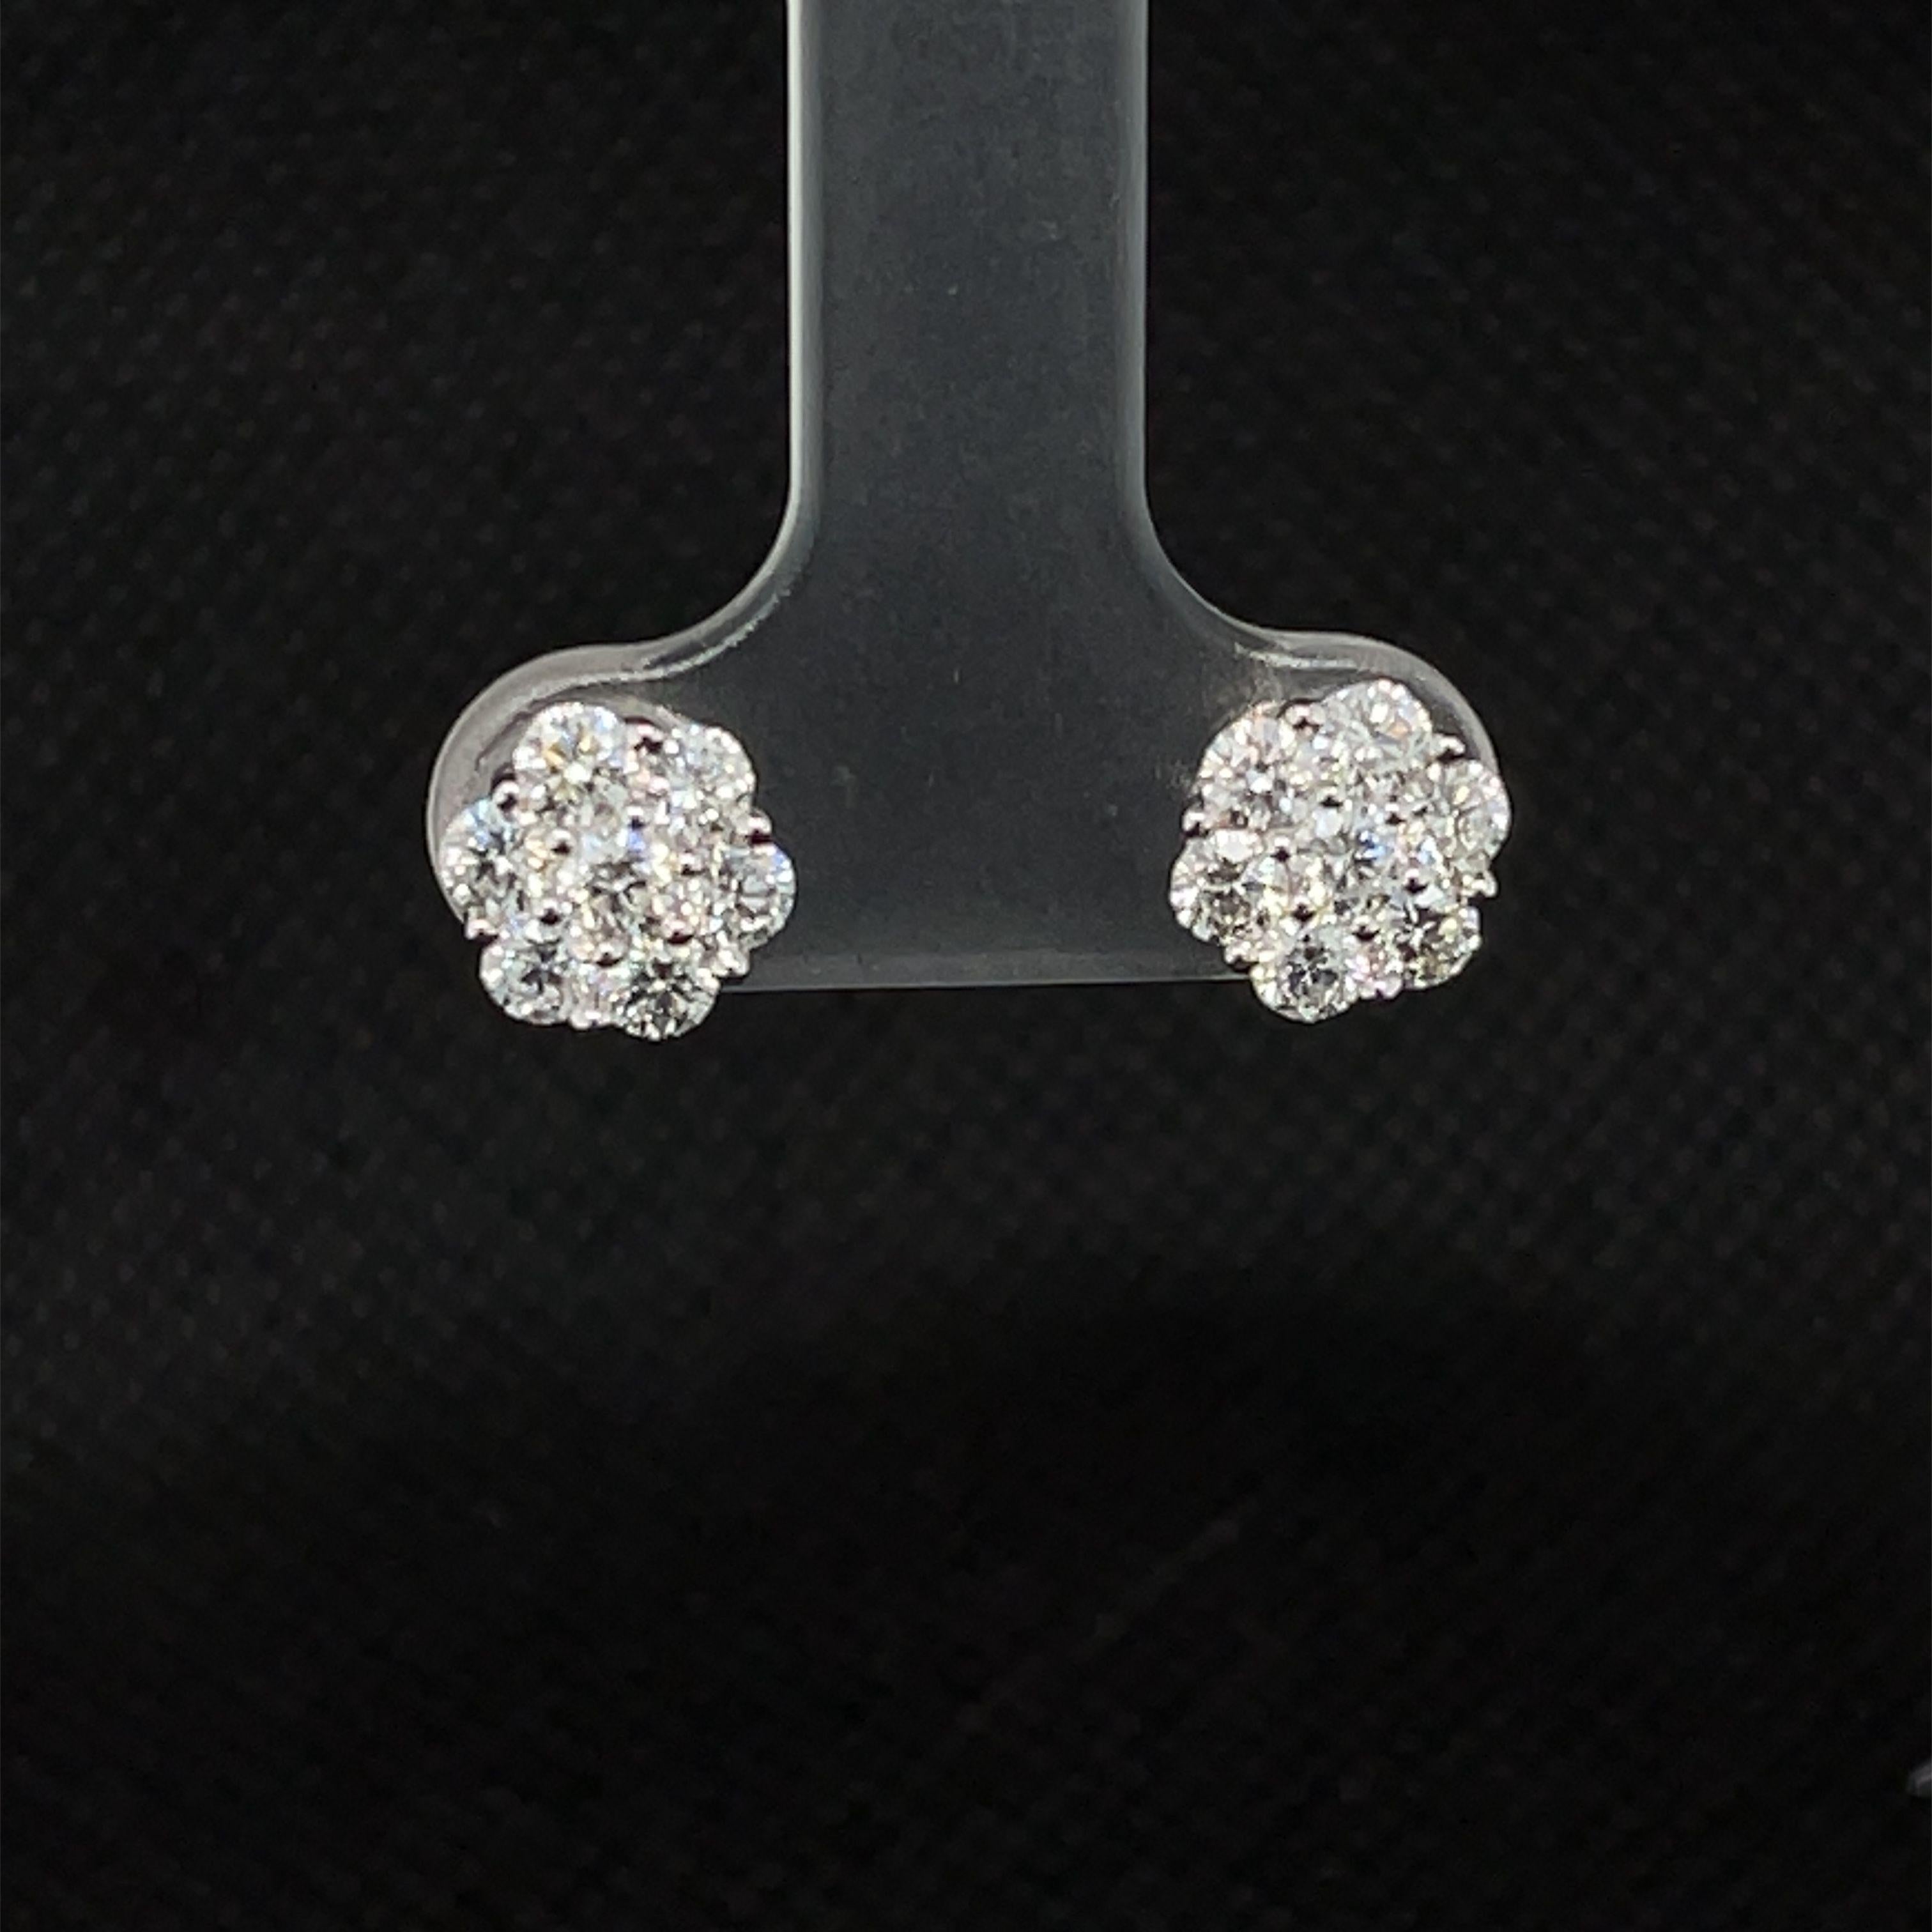 Everyone needs a pair of diamond earrings in their fine jewelry collection and these beautiful studs are a stylish and classic choice! Arranged in a simple yet beautiful floral design, these earrings were made for special occasions, like everyday